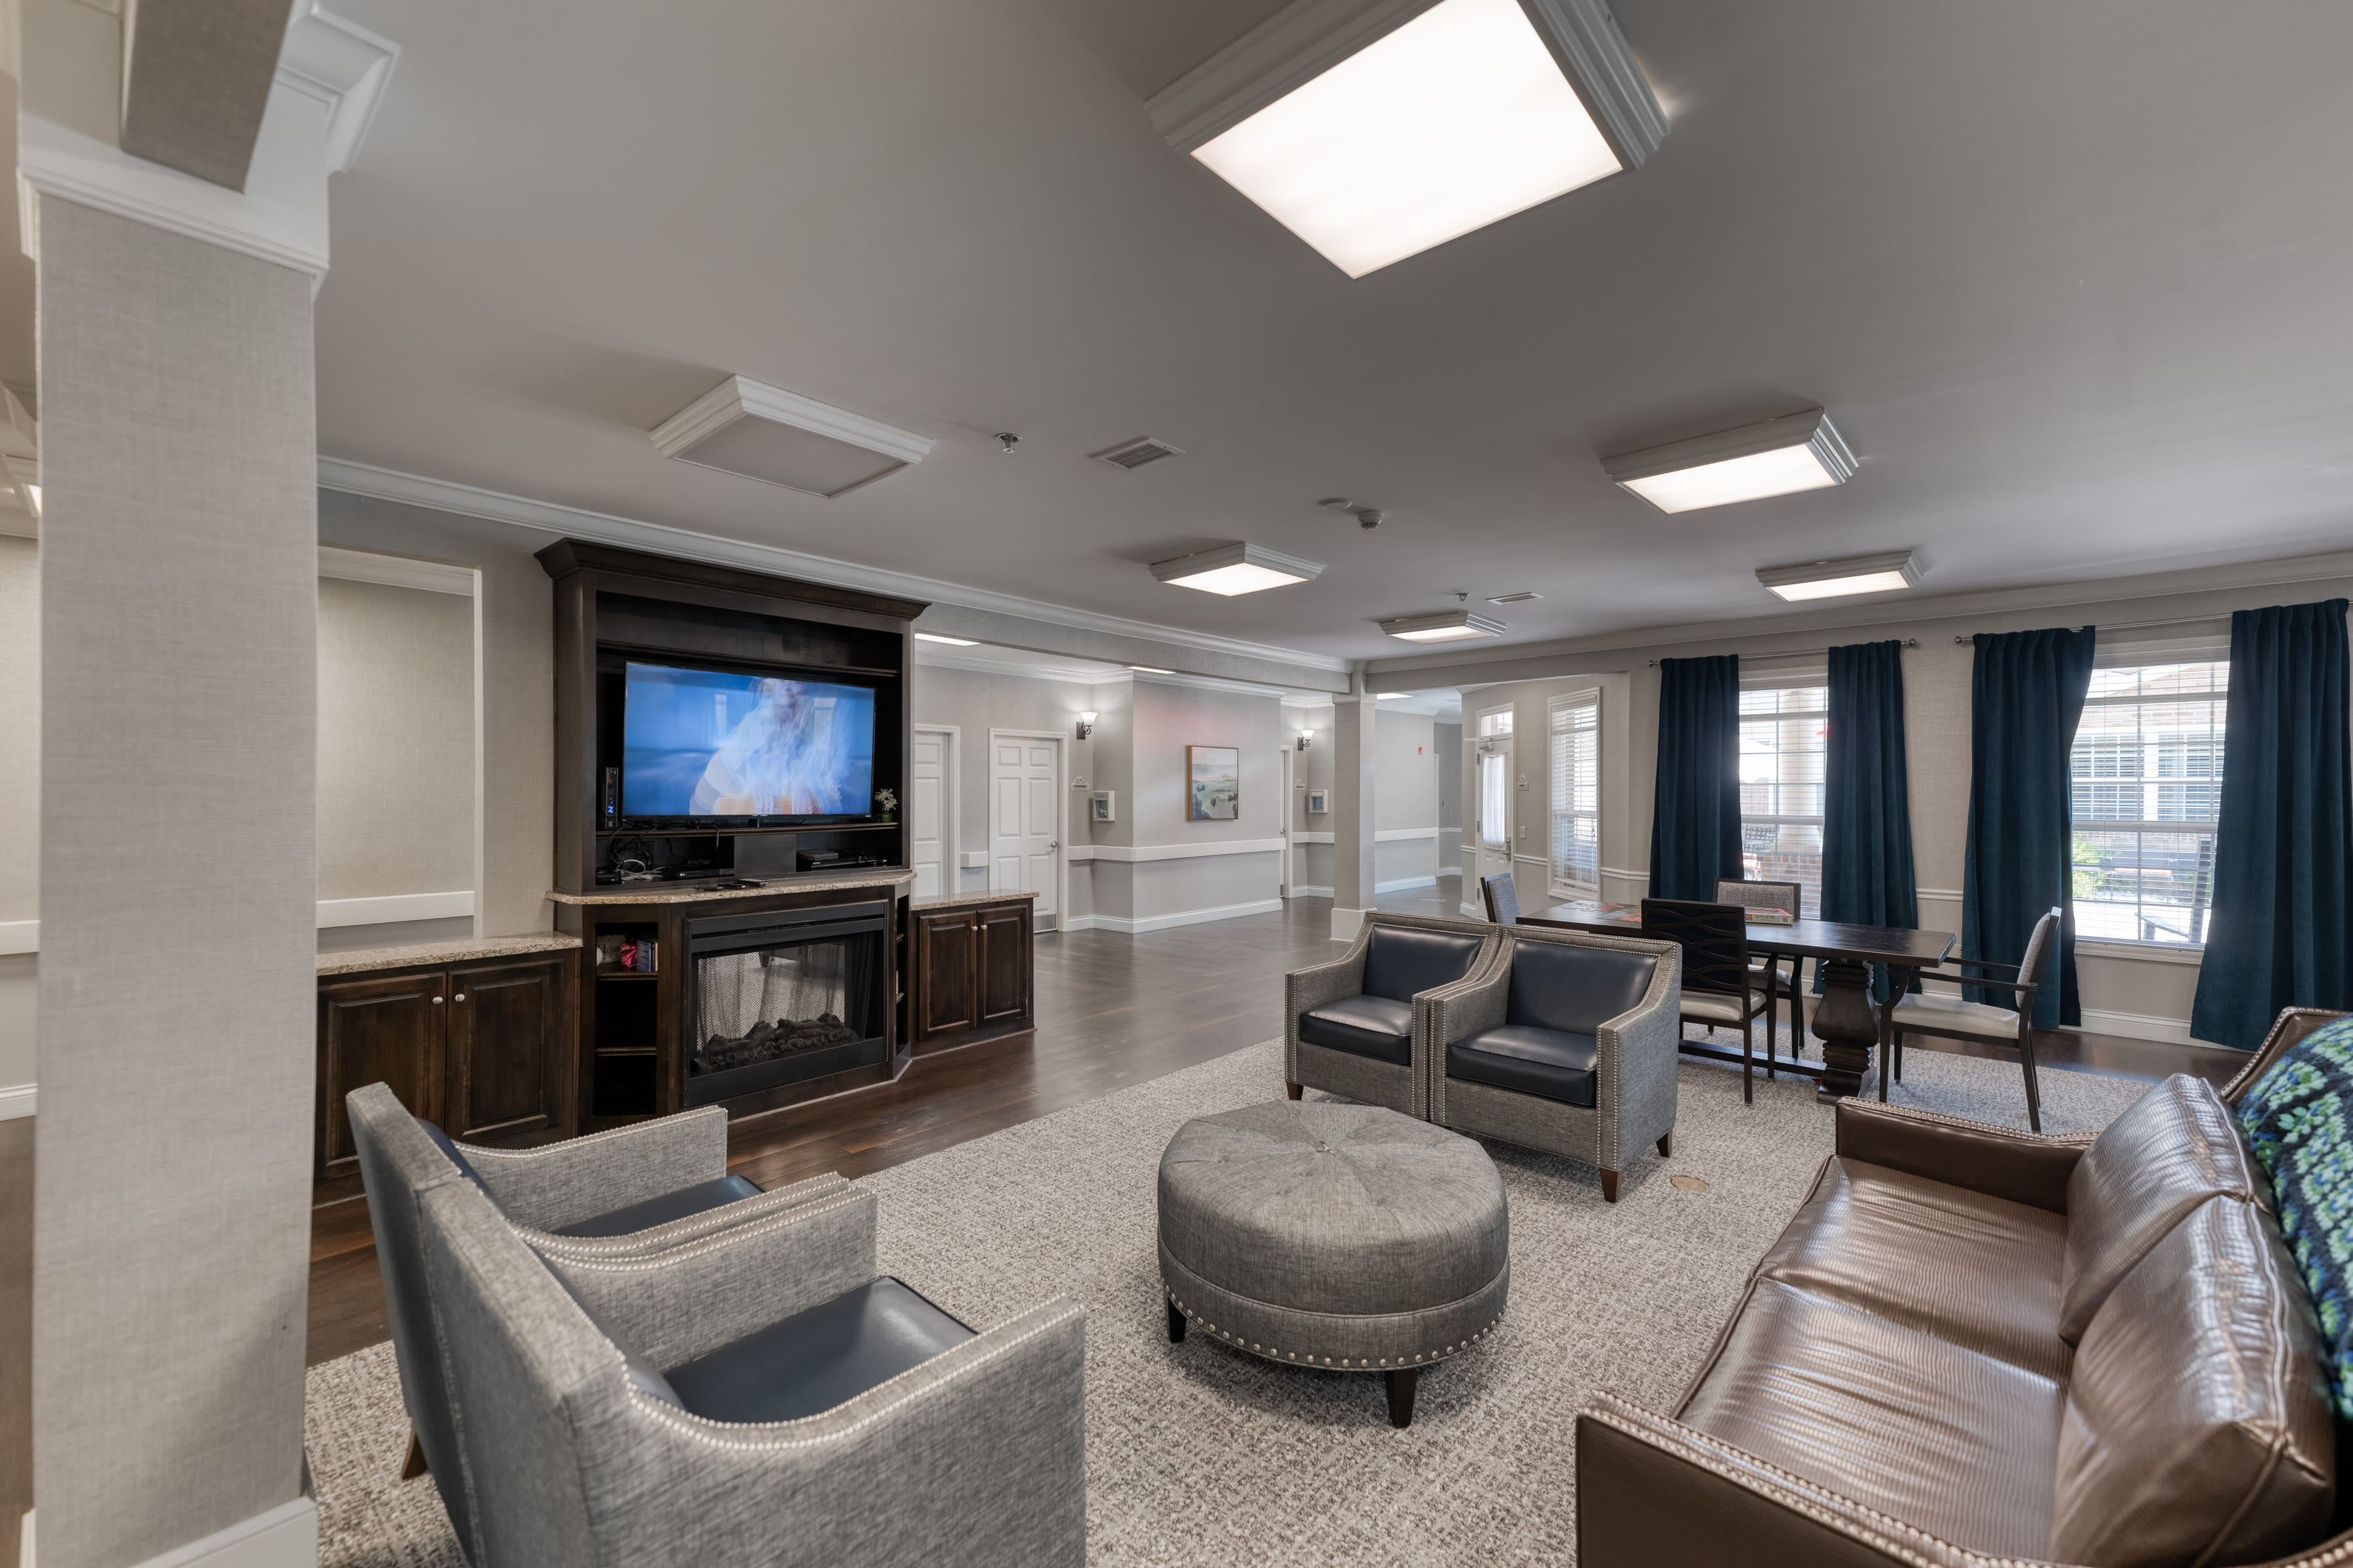 Cozy lounge with a large tv at Addington Place of Shoal Creek in Kansas City, Missouri. 